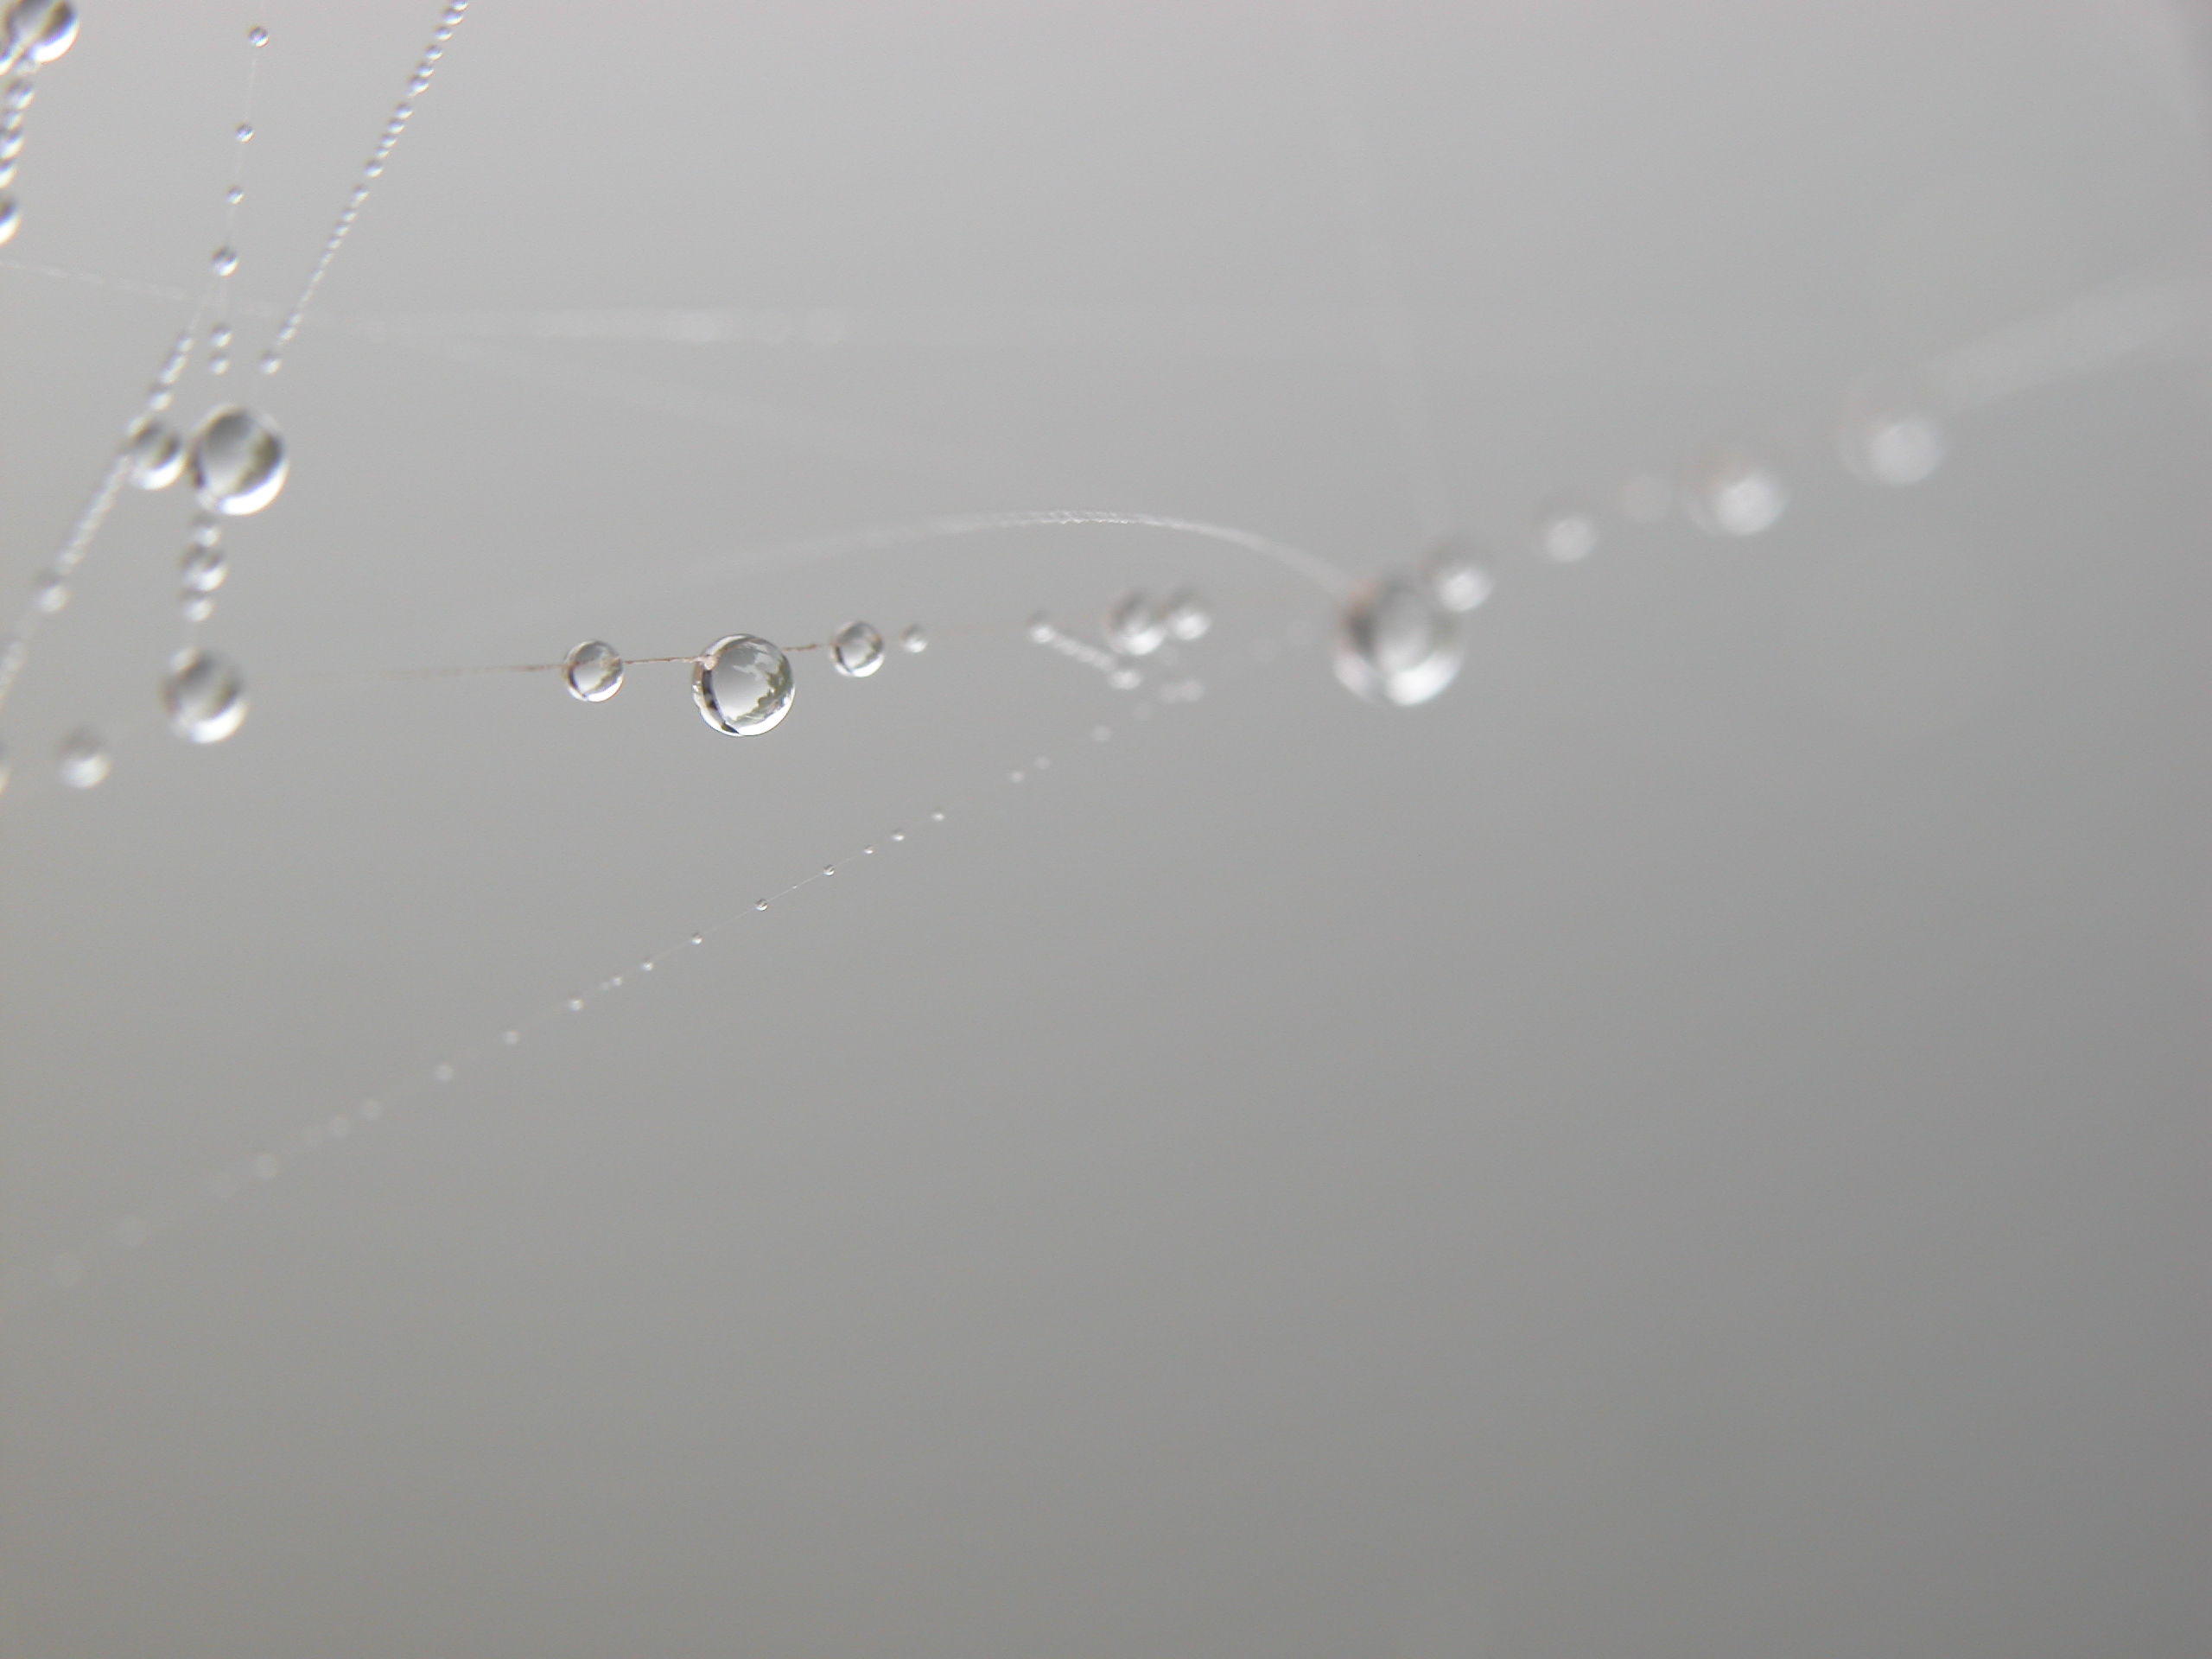 webs web spiderweb moist dew drops water threads wires royalty free